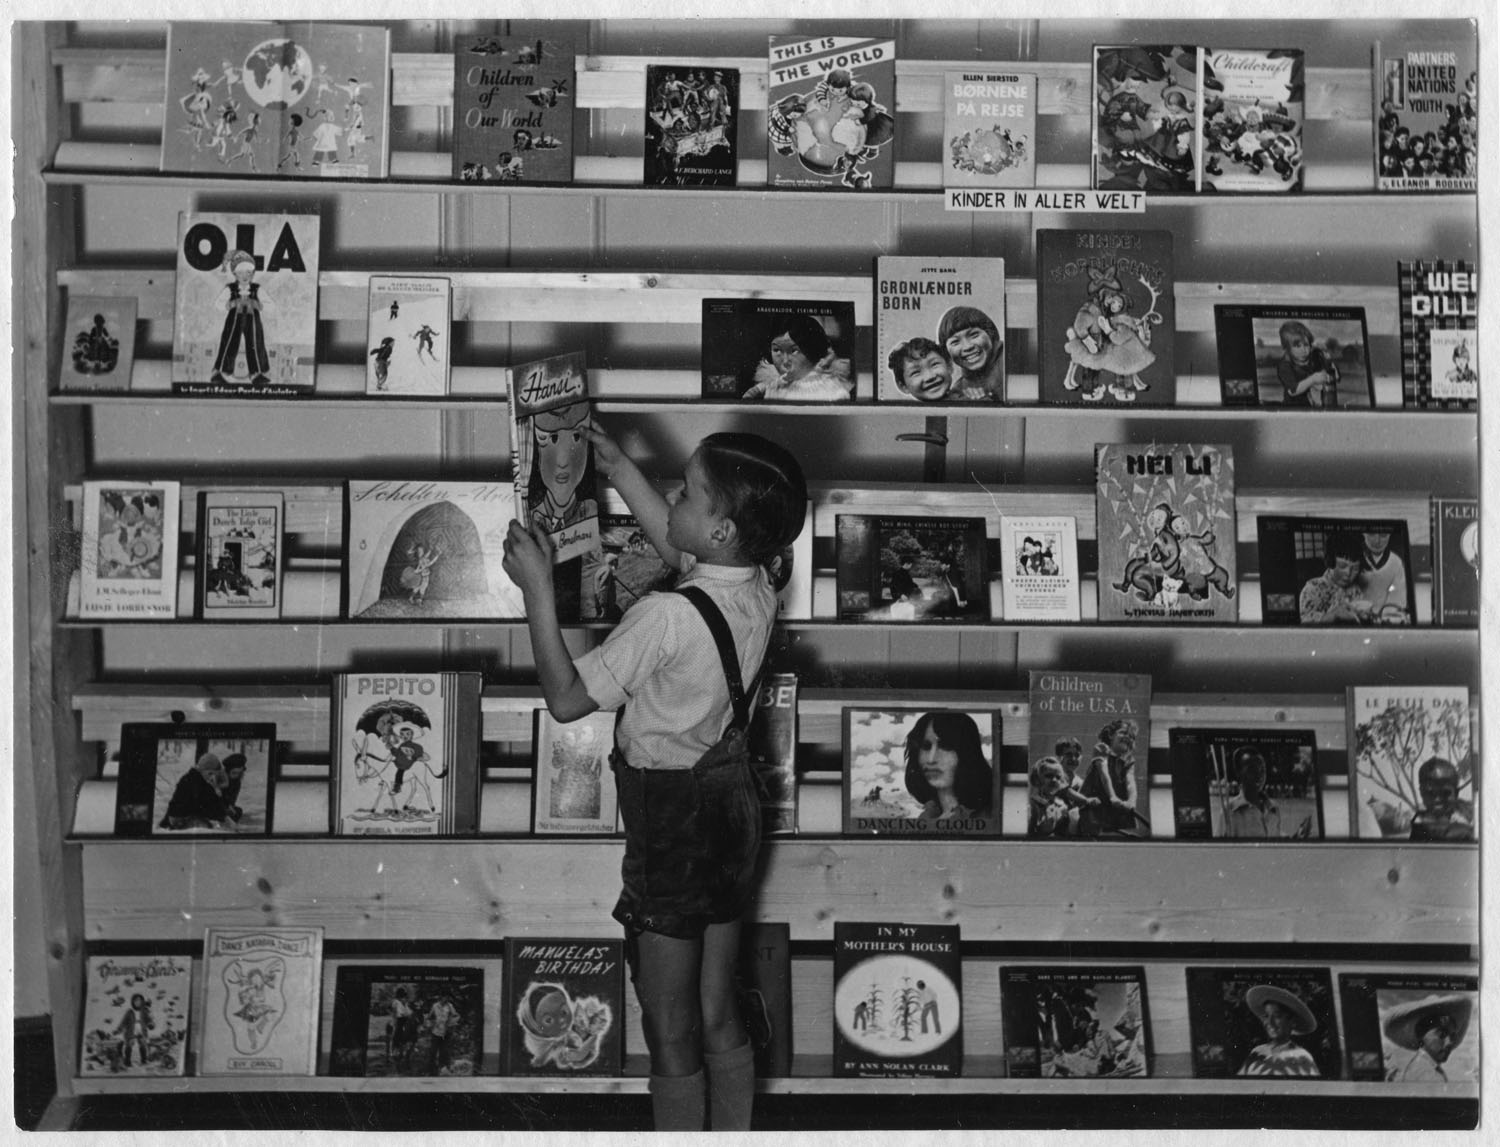 International children's youth book exhibition, 1954 (Germany)